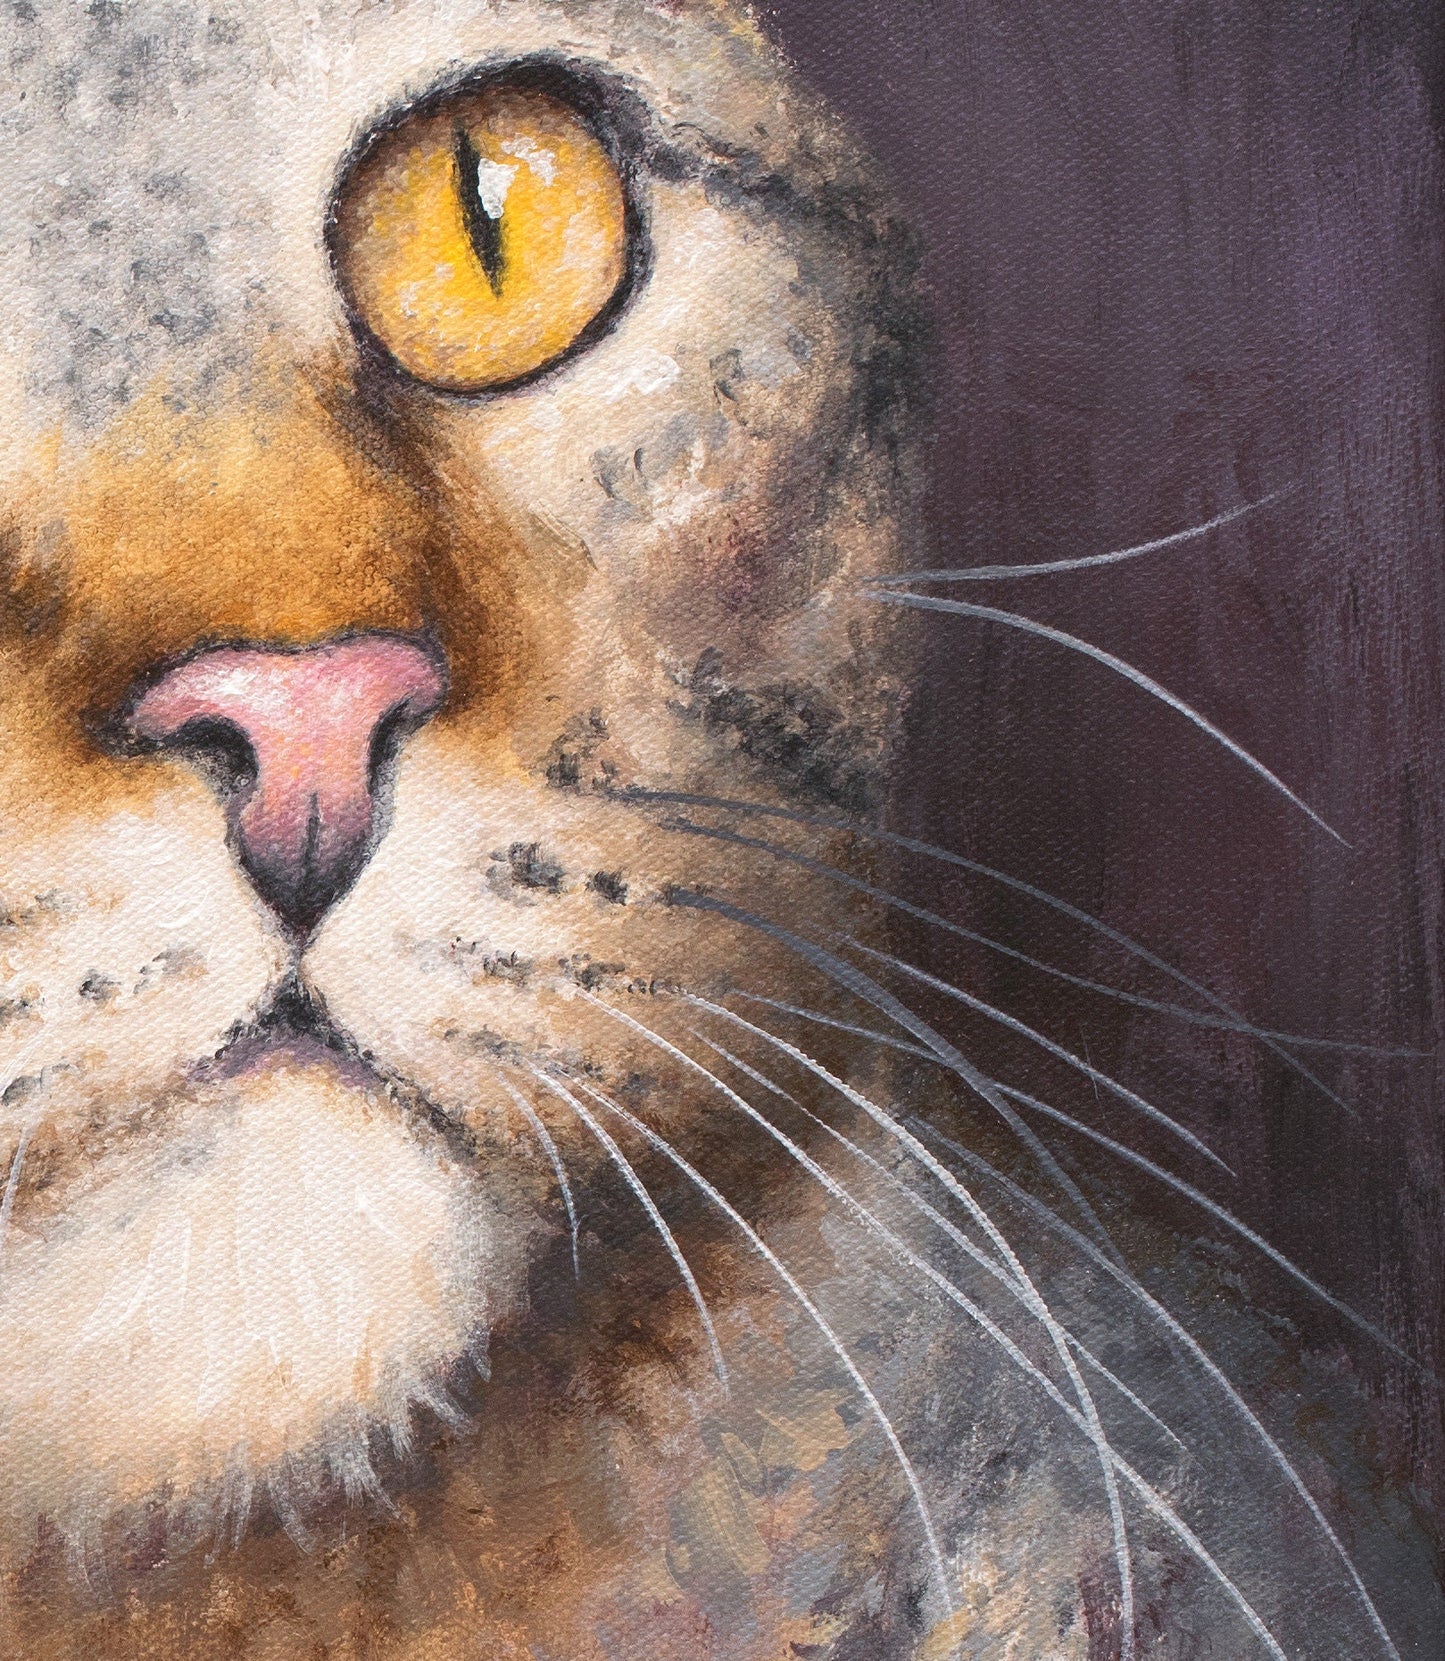 Brown Tabby Cat Art - Cat Print on CANVAS or PAPER of Tabby Cat Painting by Krystle Cole